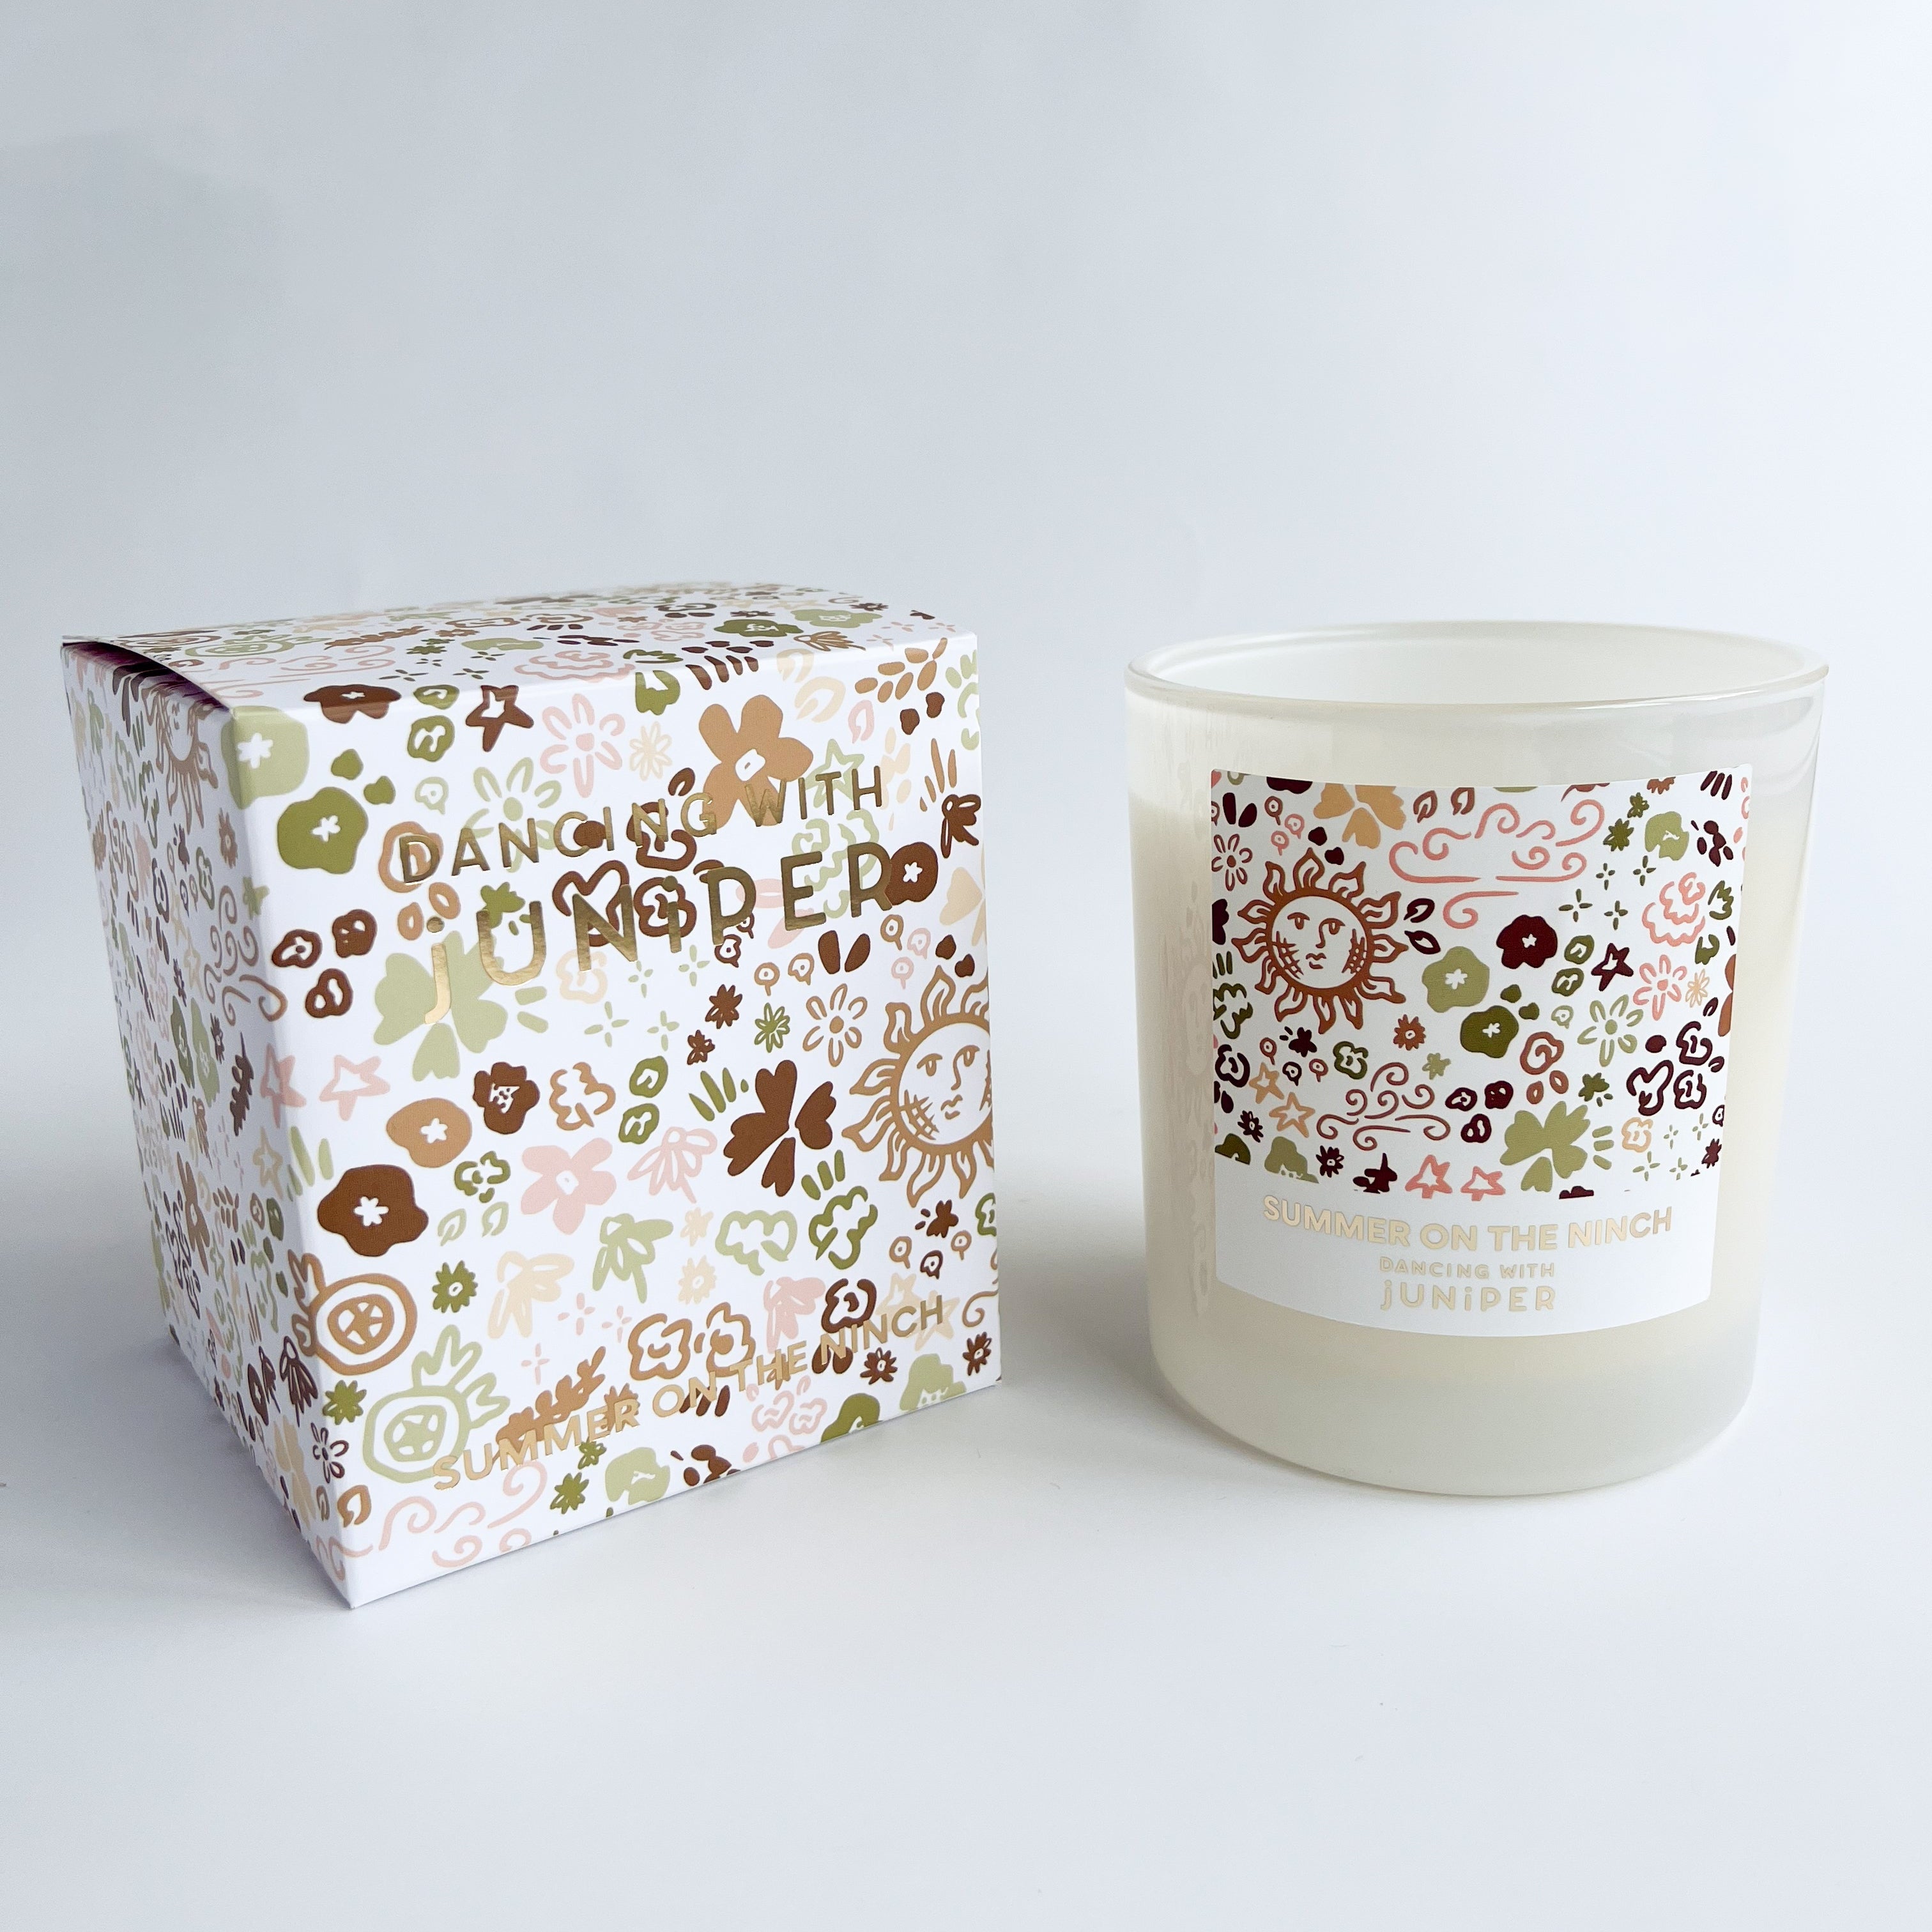 Summer on the Ninch Soy Candle - candle - Dancing with juniper